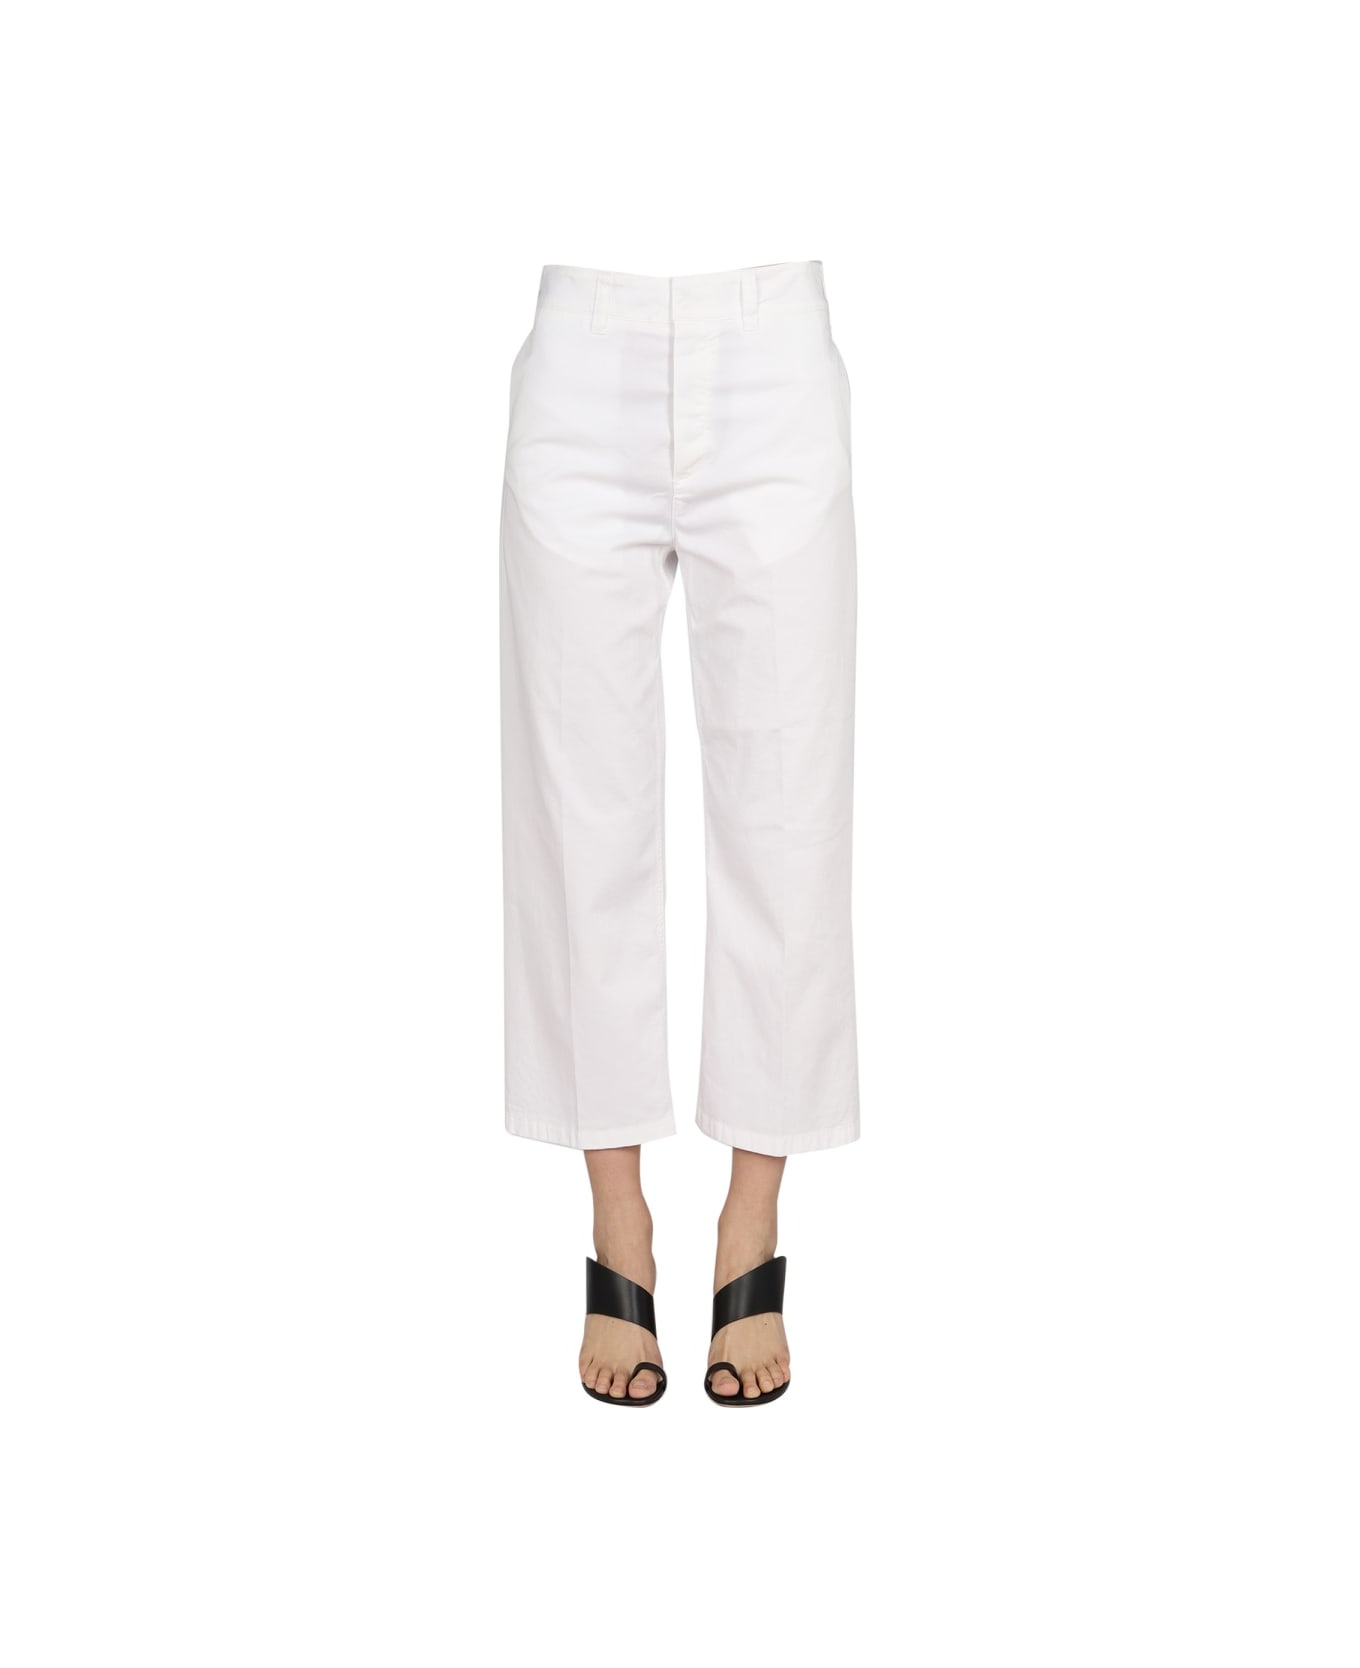 Department Five Cropped Fit Jeans - WHITE